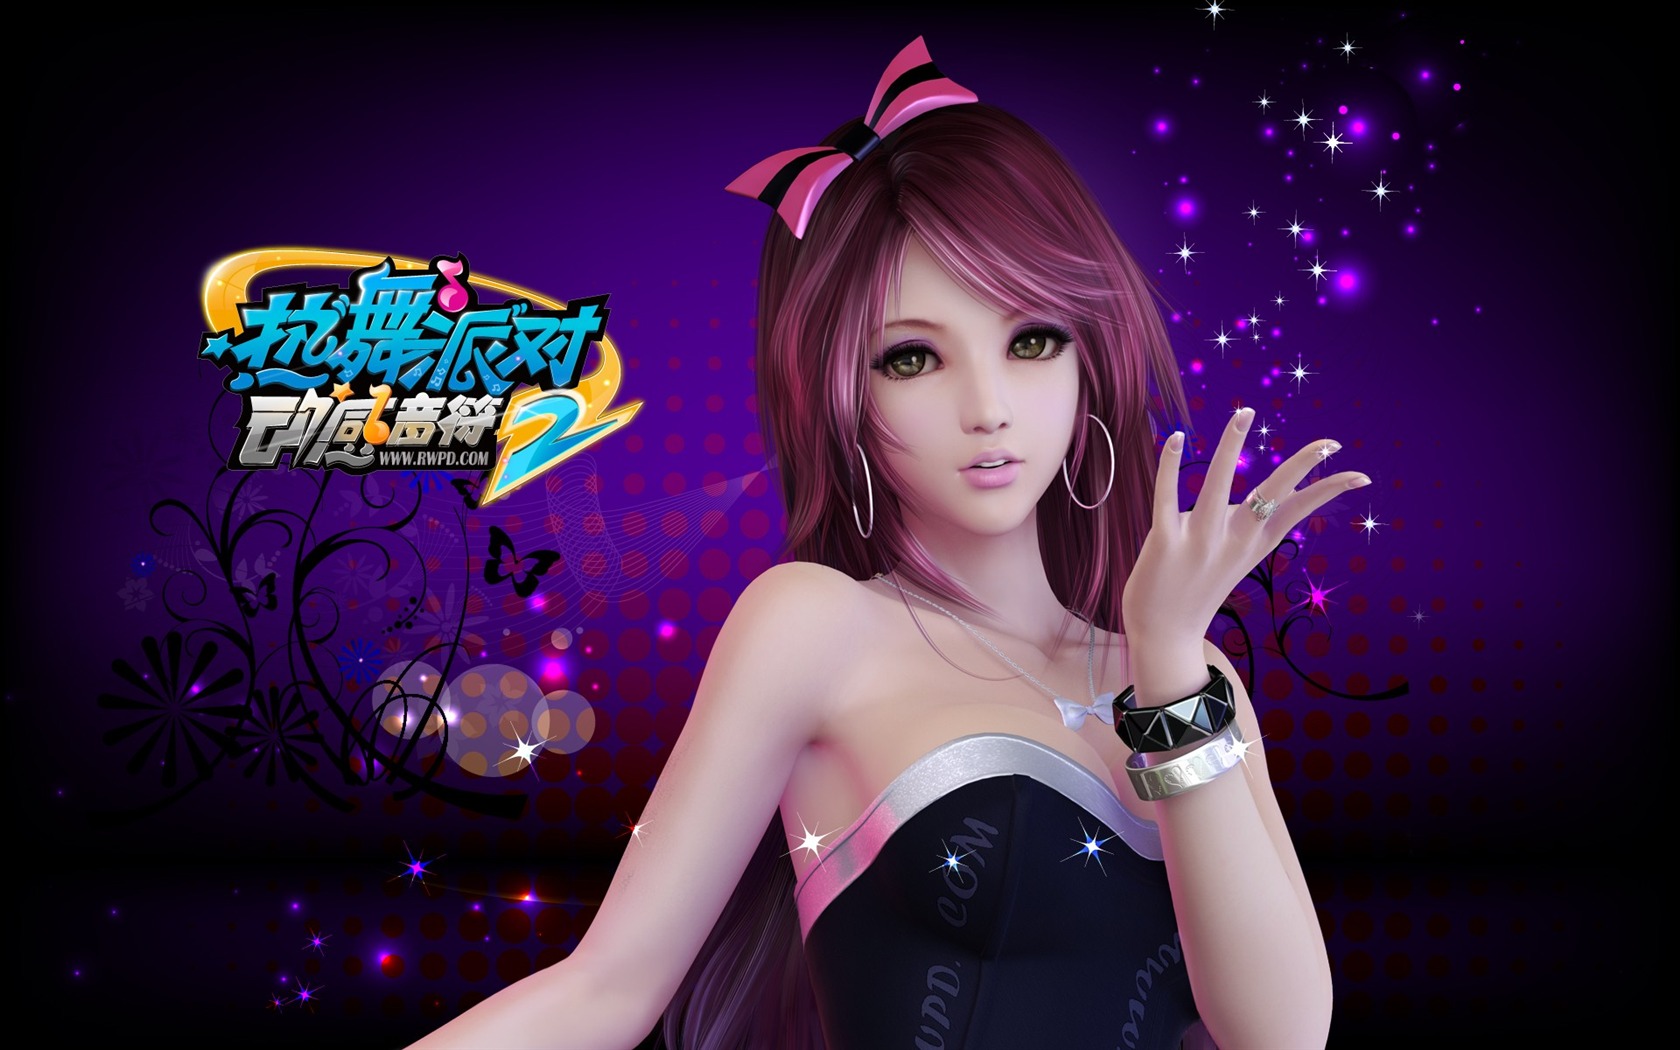 Online game Hot Dance Party II official wallpapers #33 - 1680x1050